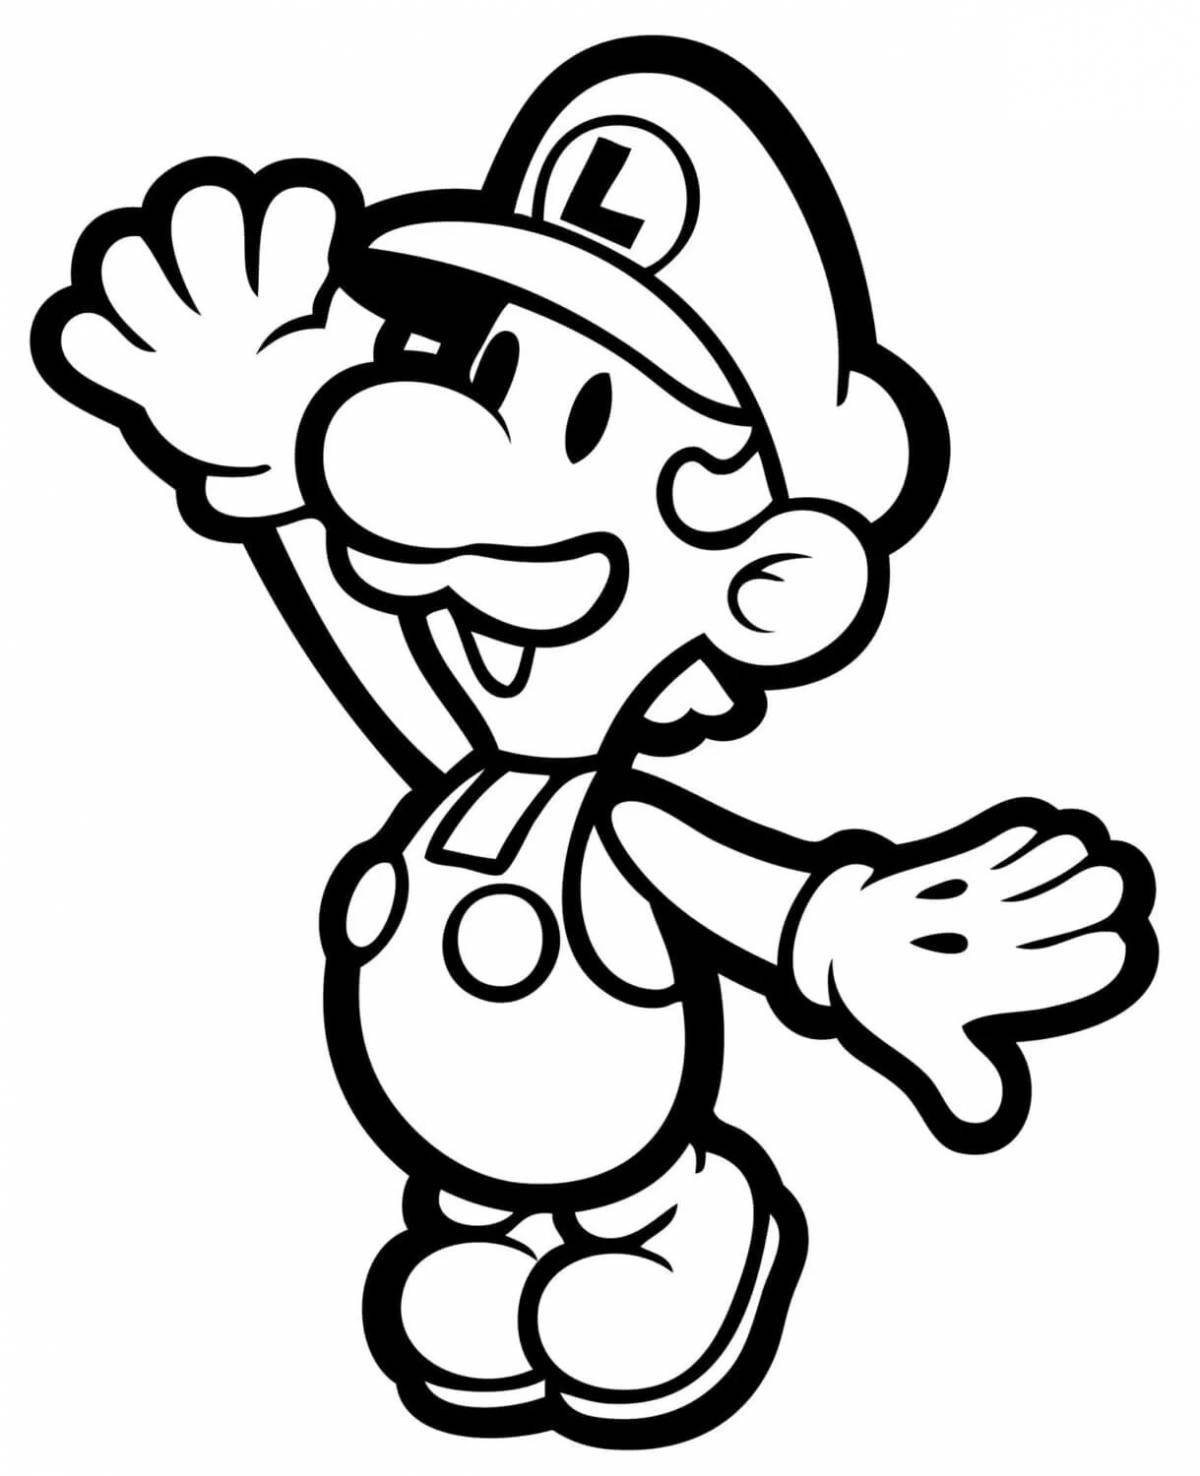 Luigi and mario funny coloring pages